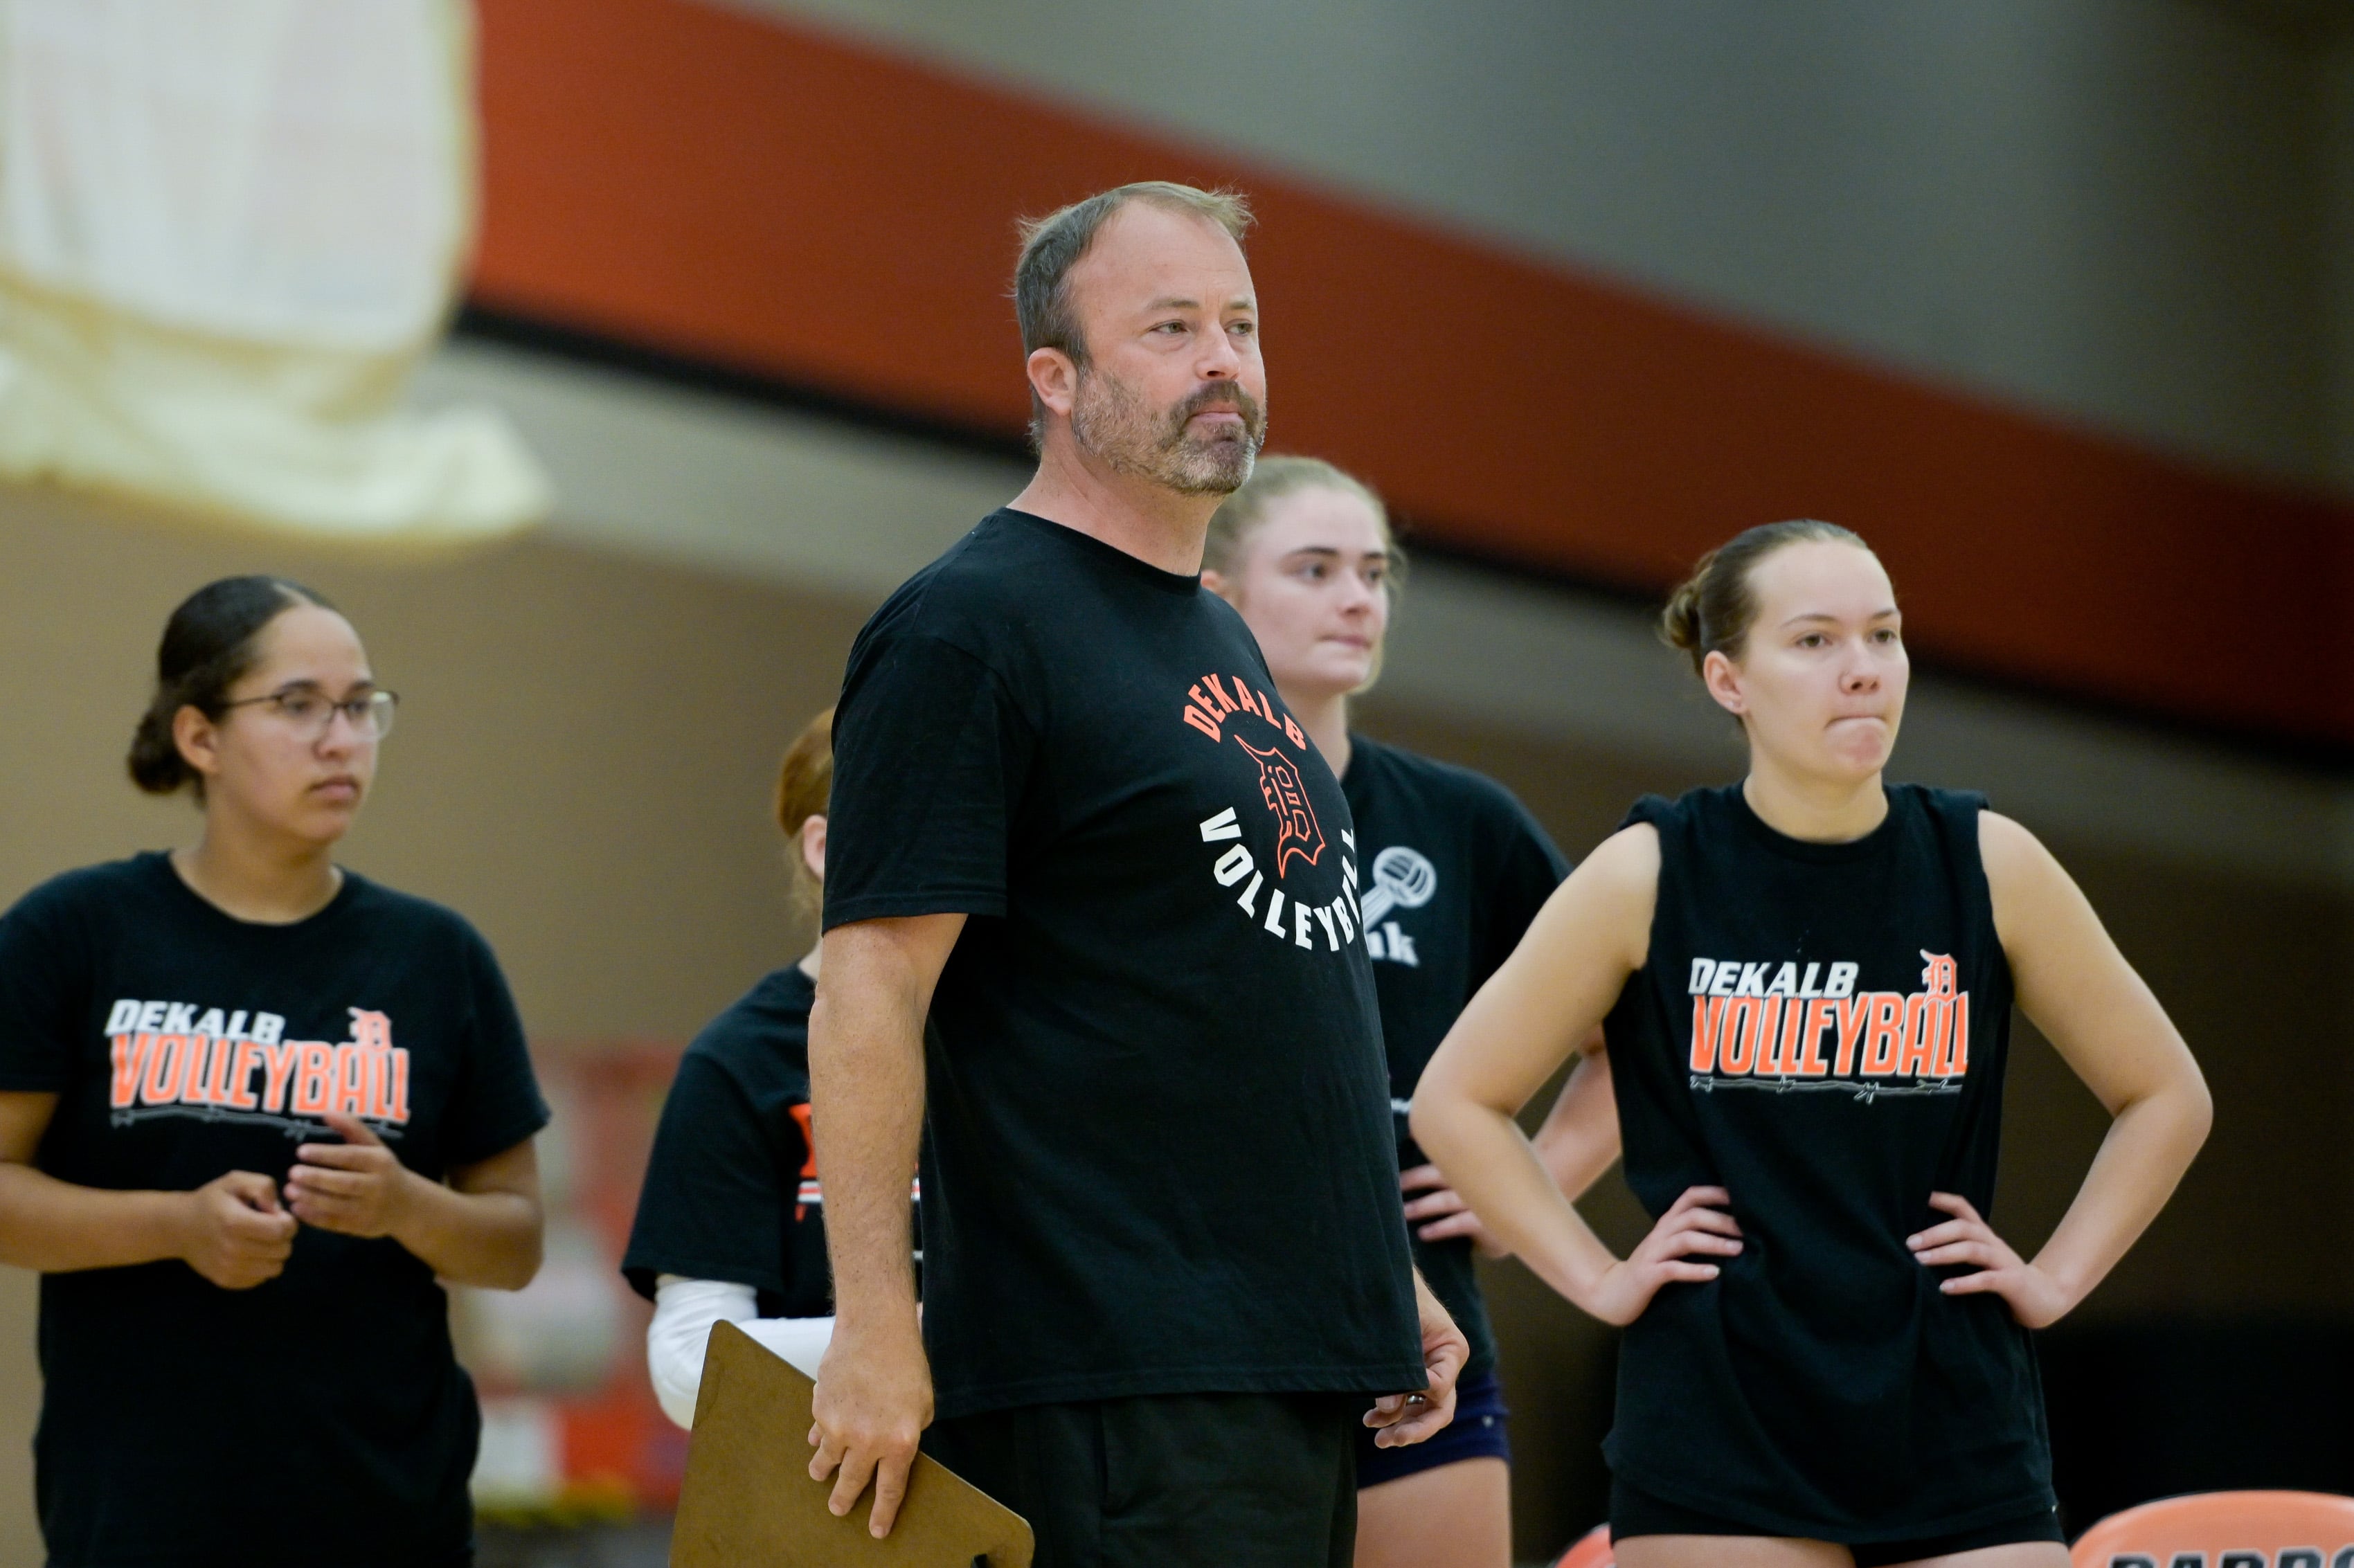 Volleyball: ‘Underdog’ DeKalb wrapping up productive summer under new coach Keith Foster